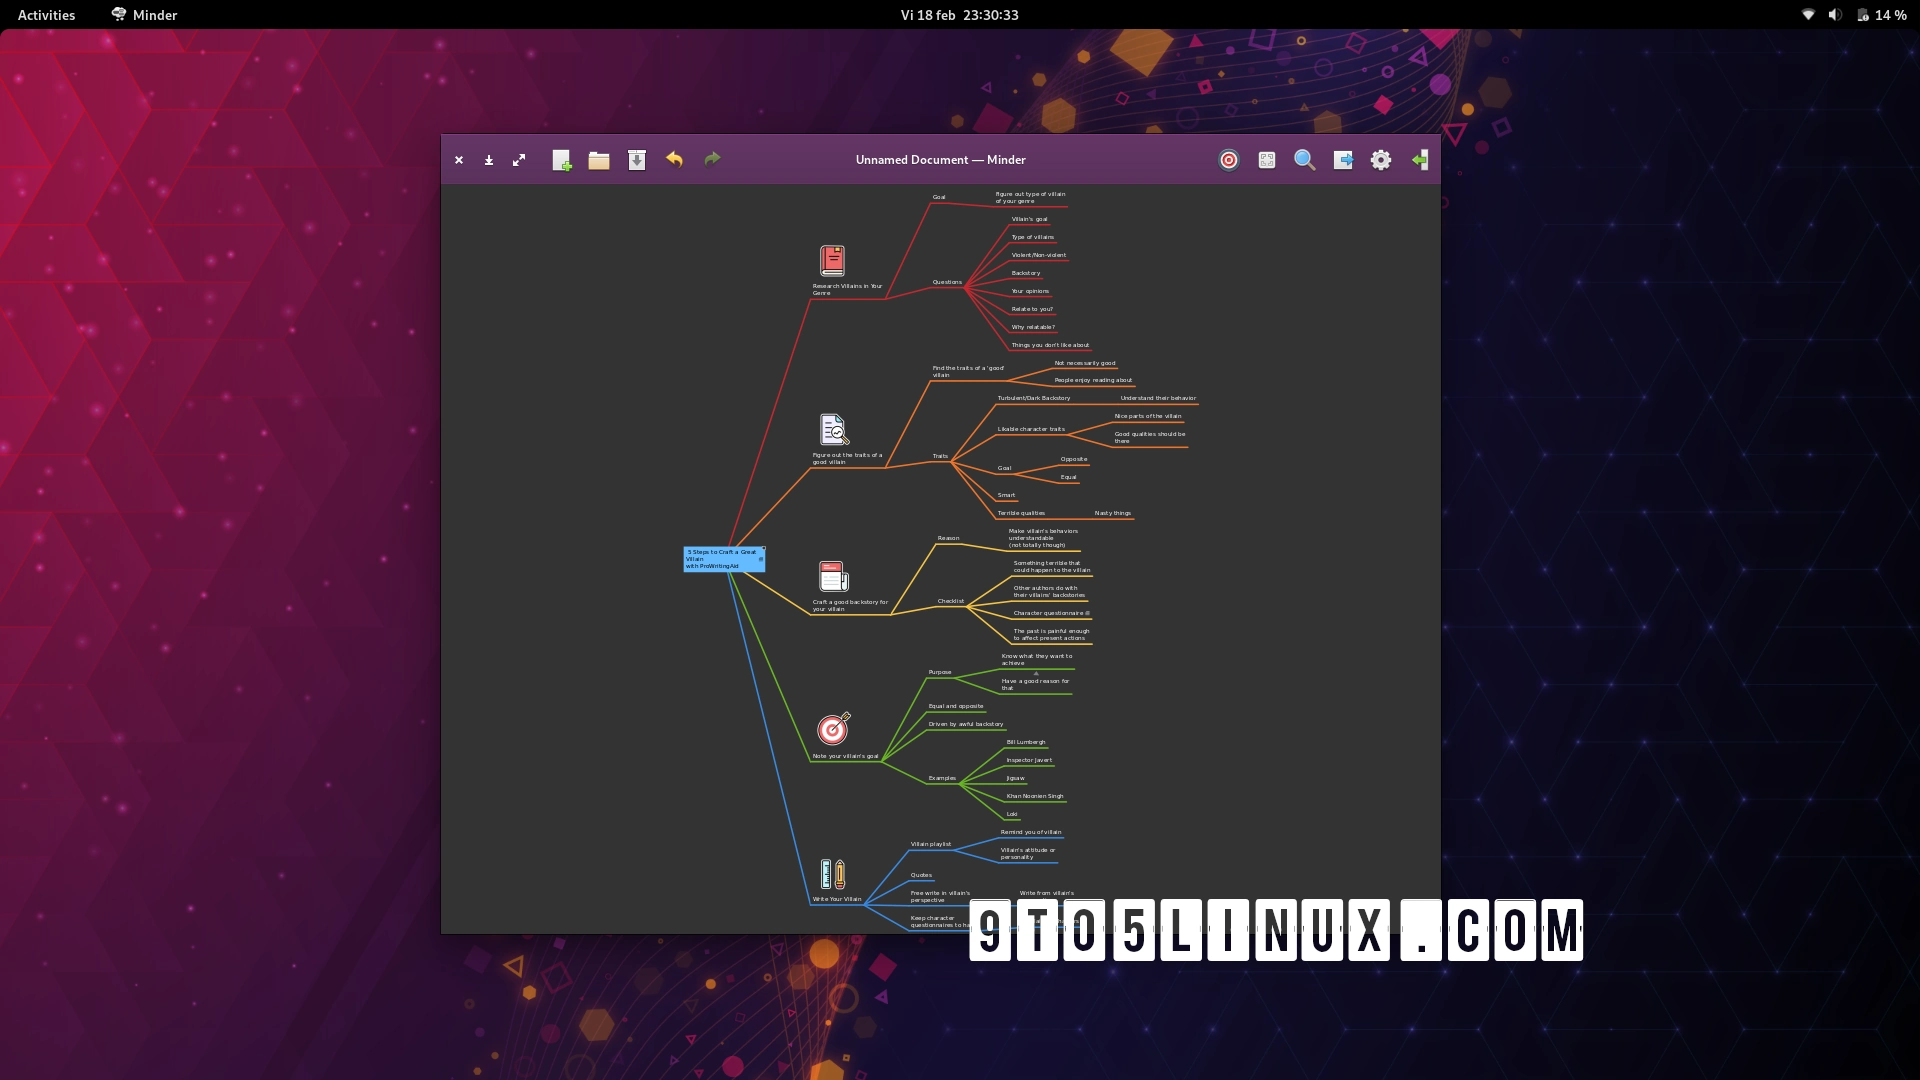 Flatpak App of the Week: Minder – Powerful Mind Mapping Software to Visualize Your Ideas